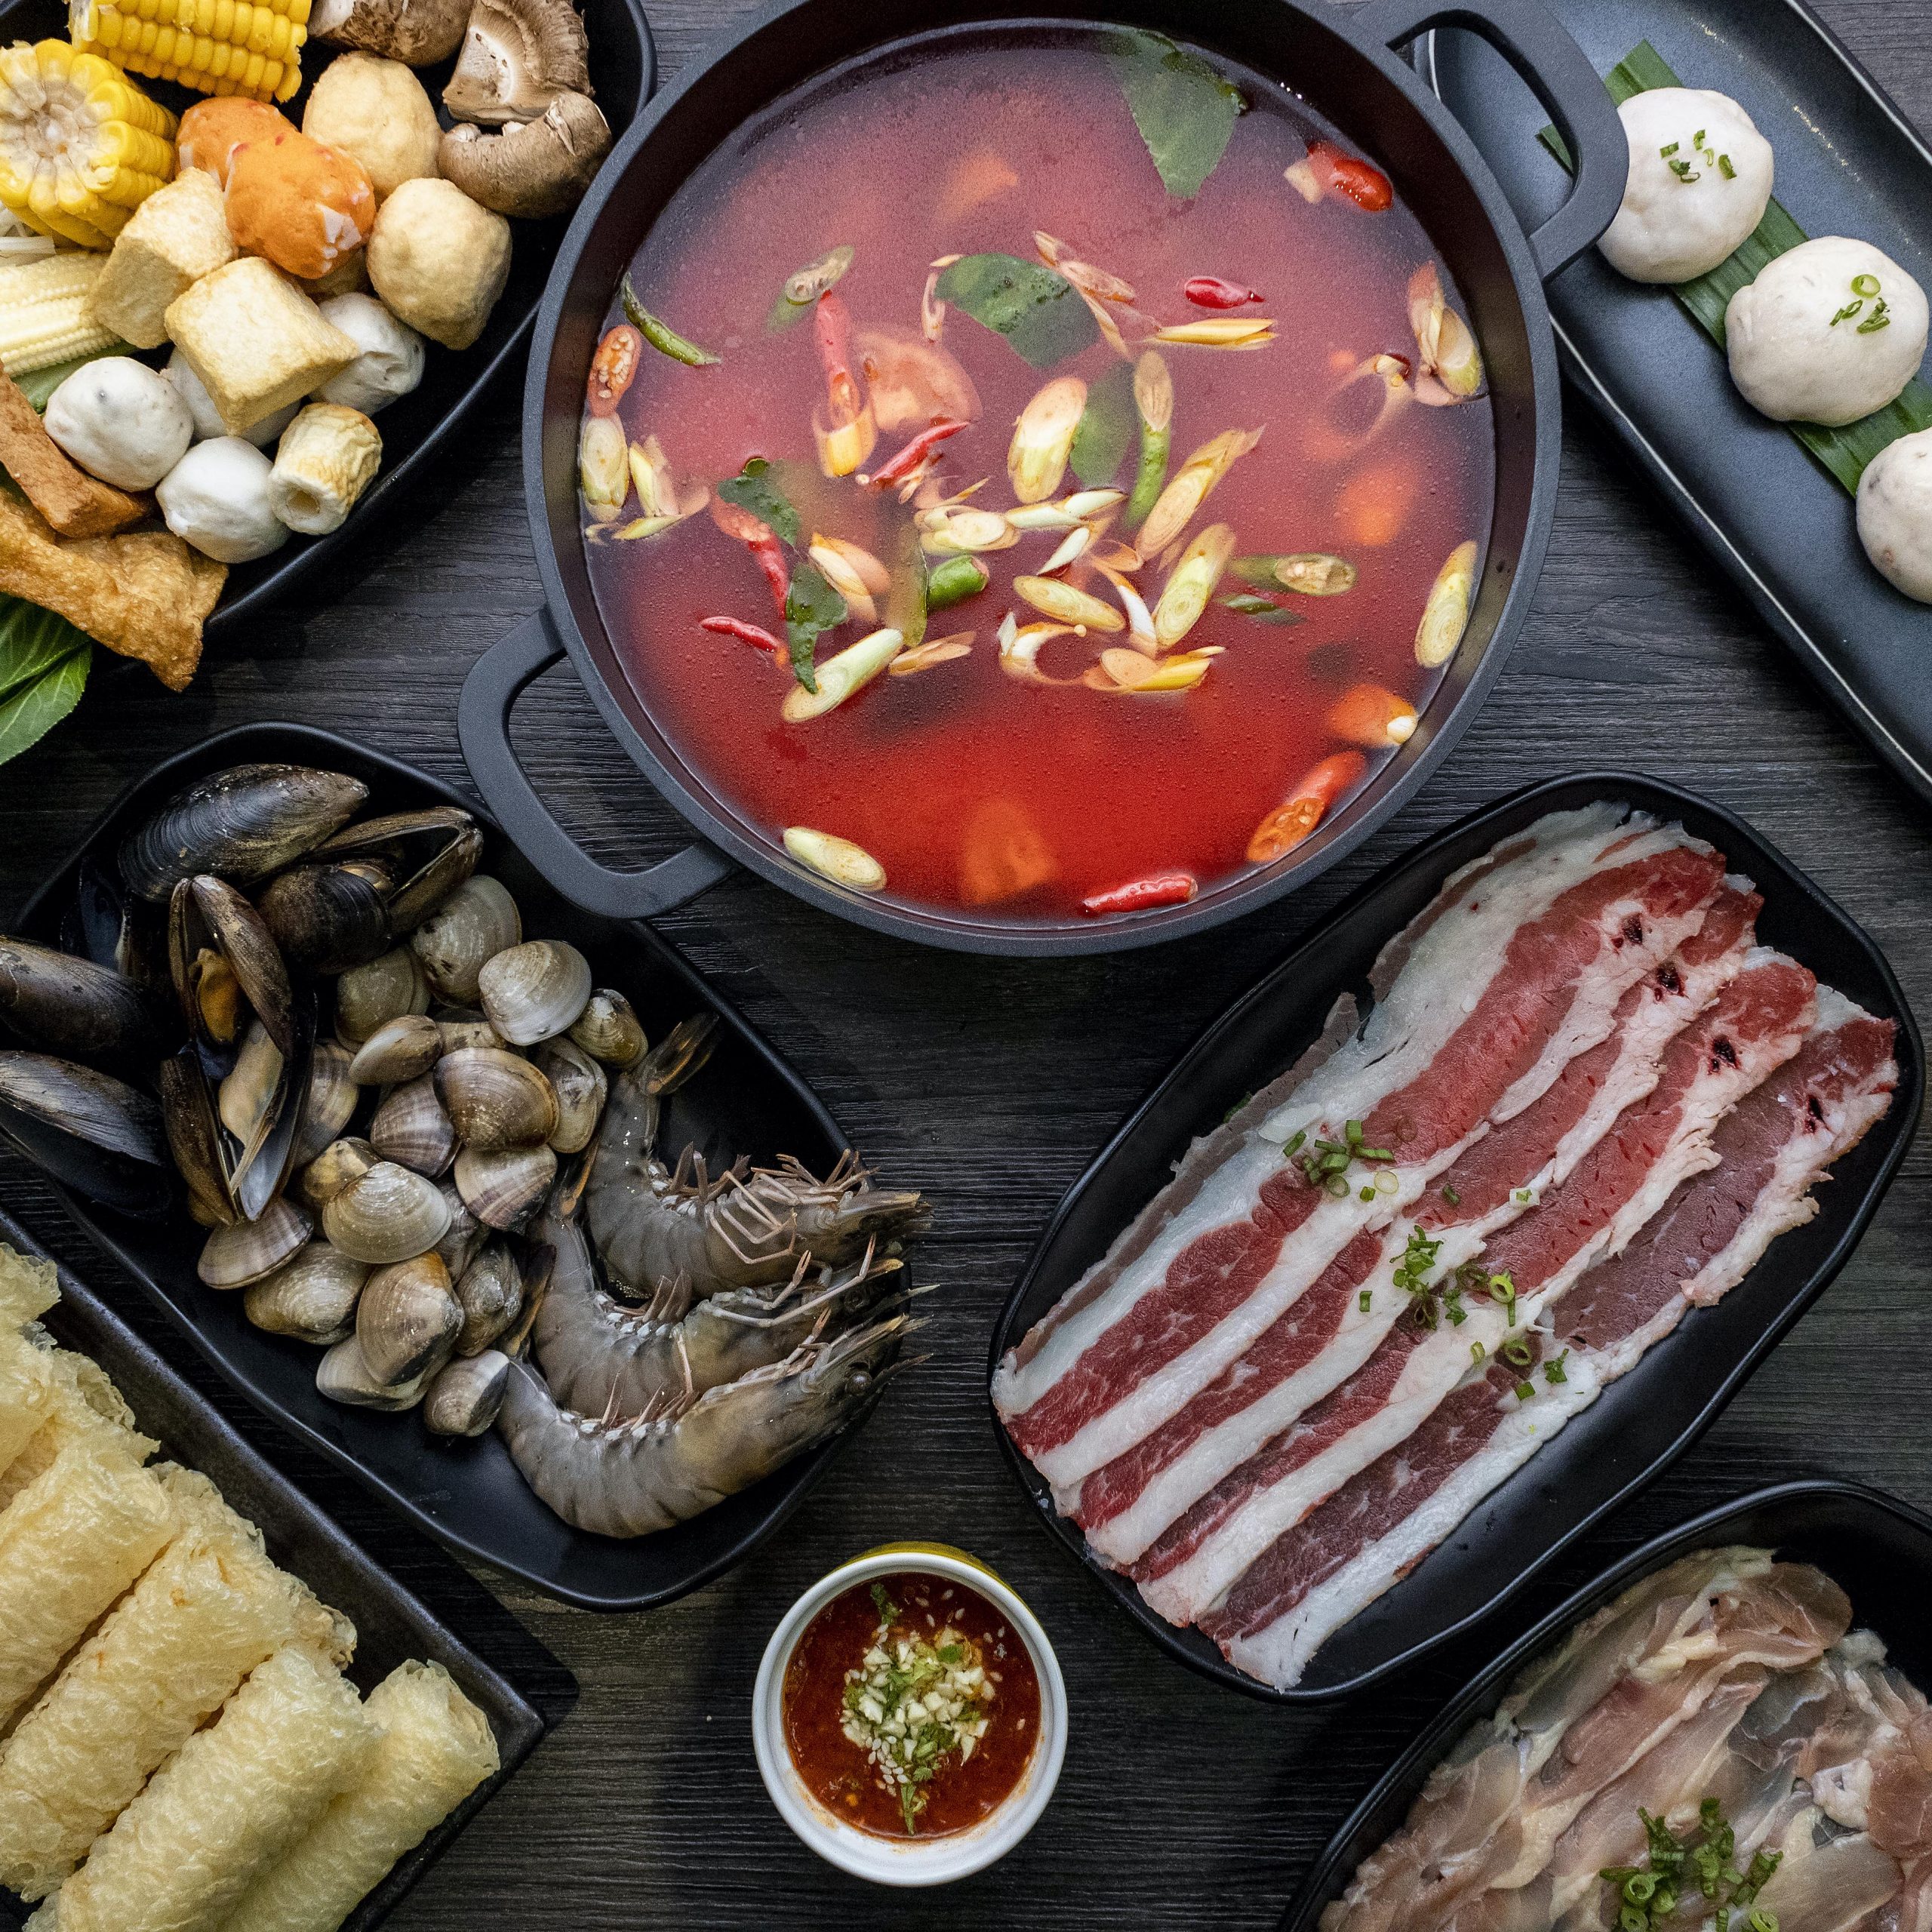 All-you-can-eat halal Thai hotpot buffet at Khatib from S ...